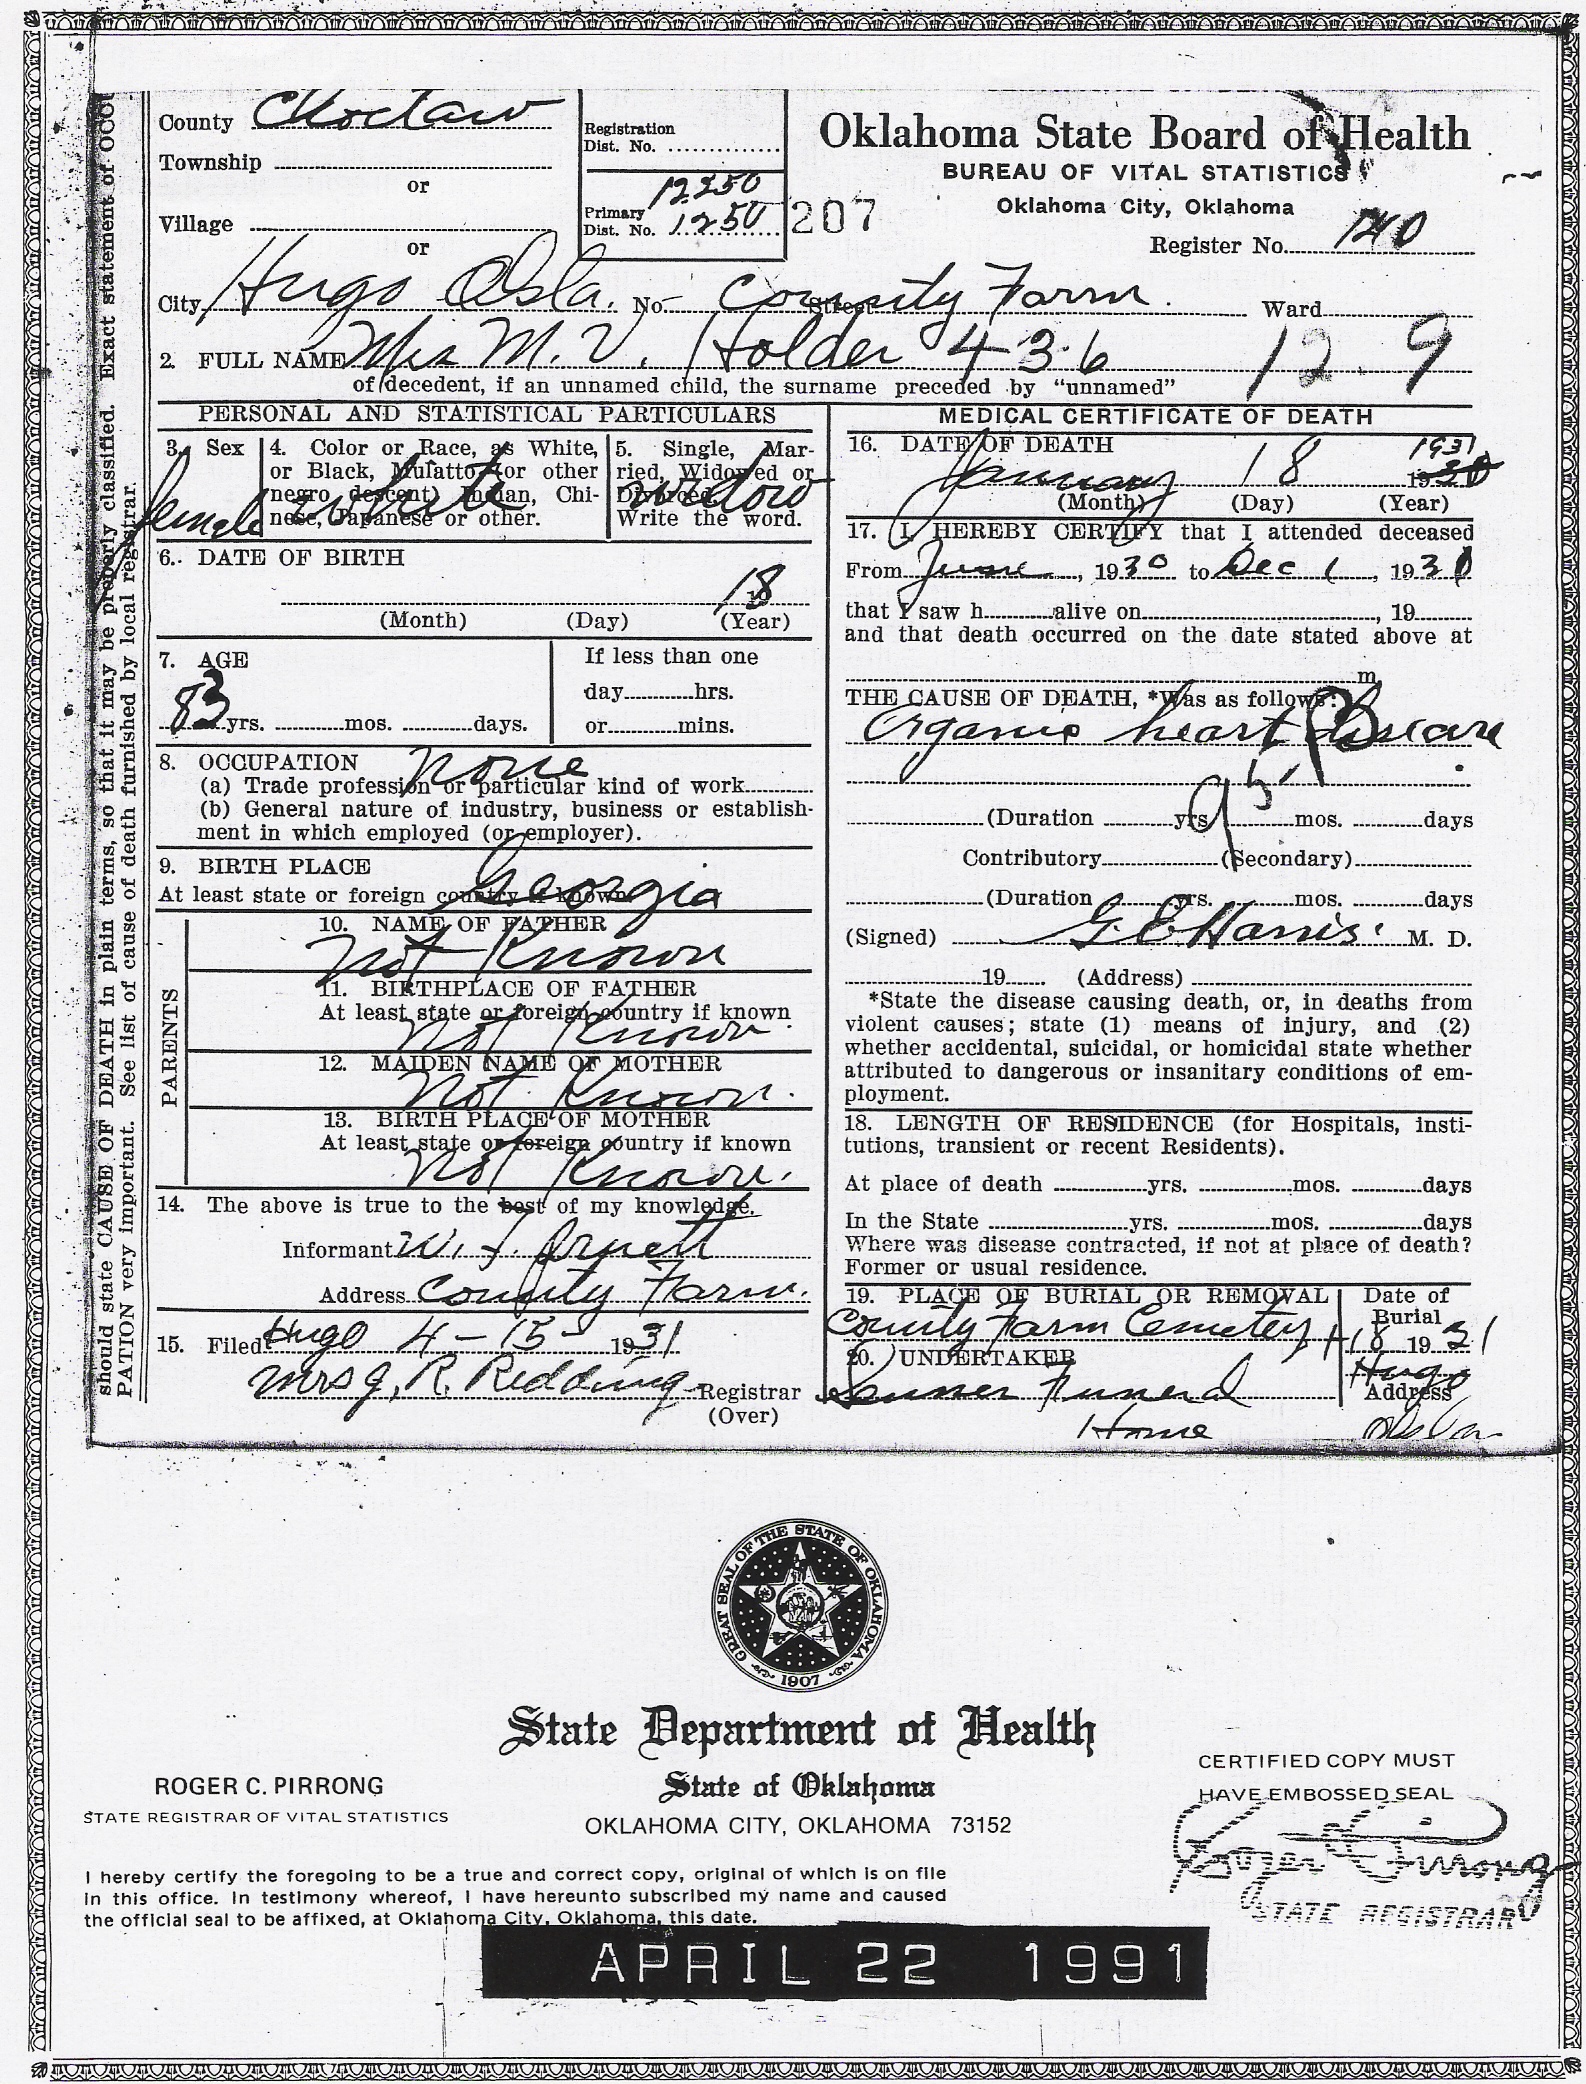 Death Certificates | The ADP